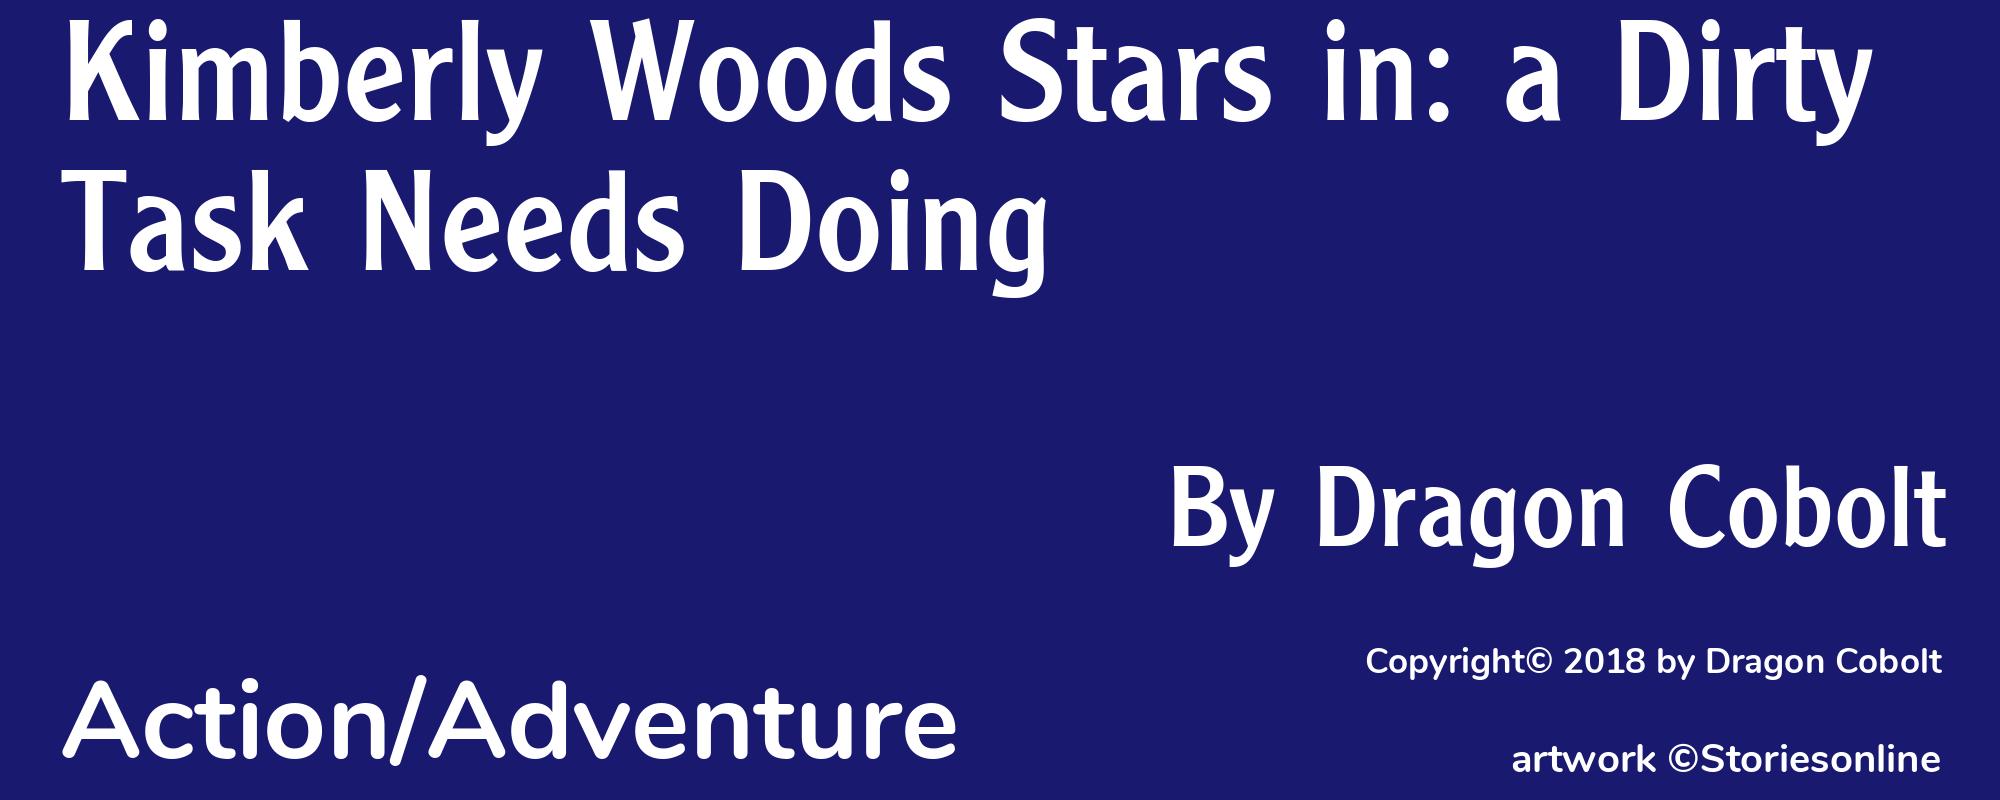 Kimberly Woods Stars in: a Dirty Task Needs Doing - Cover